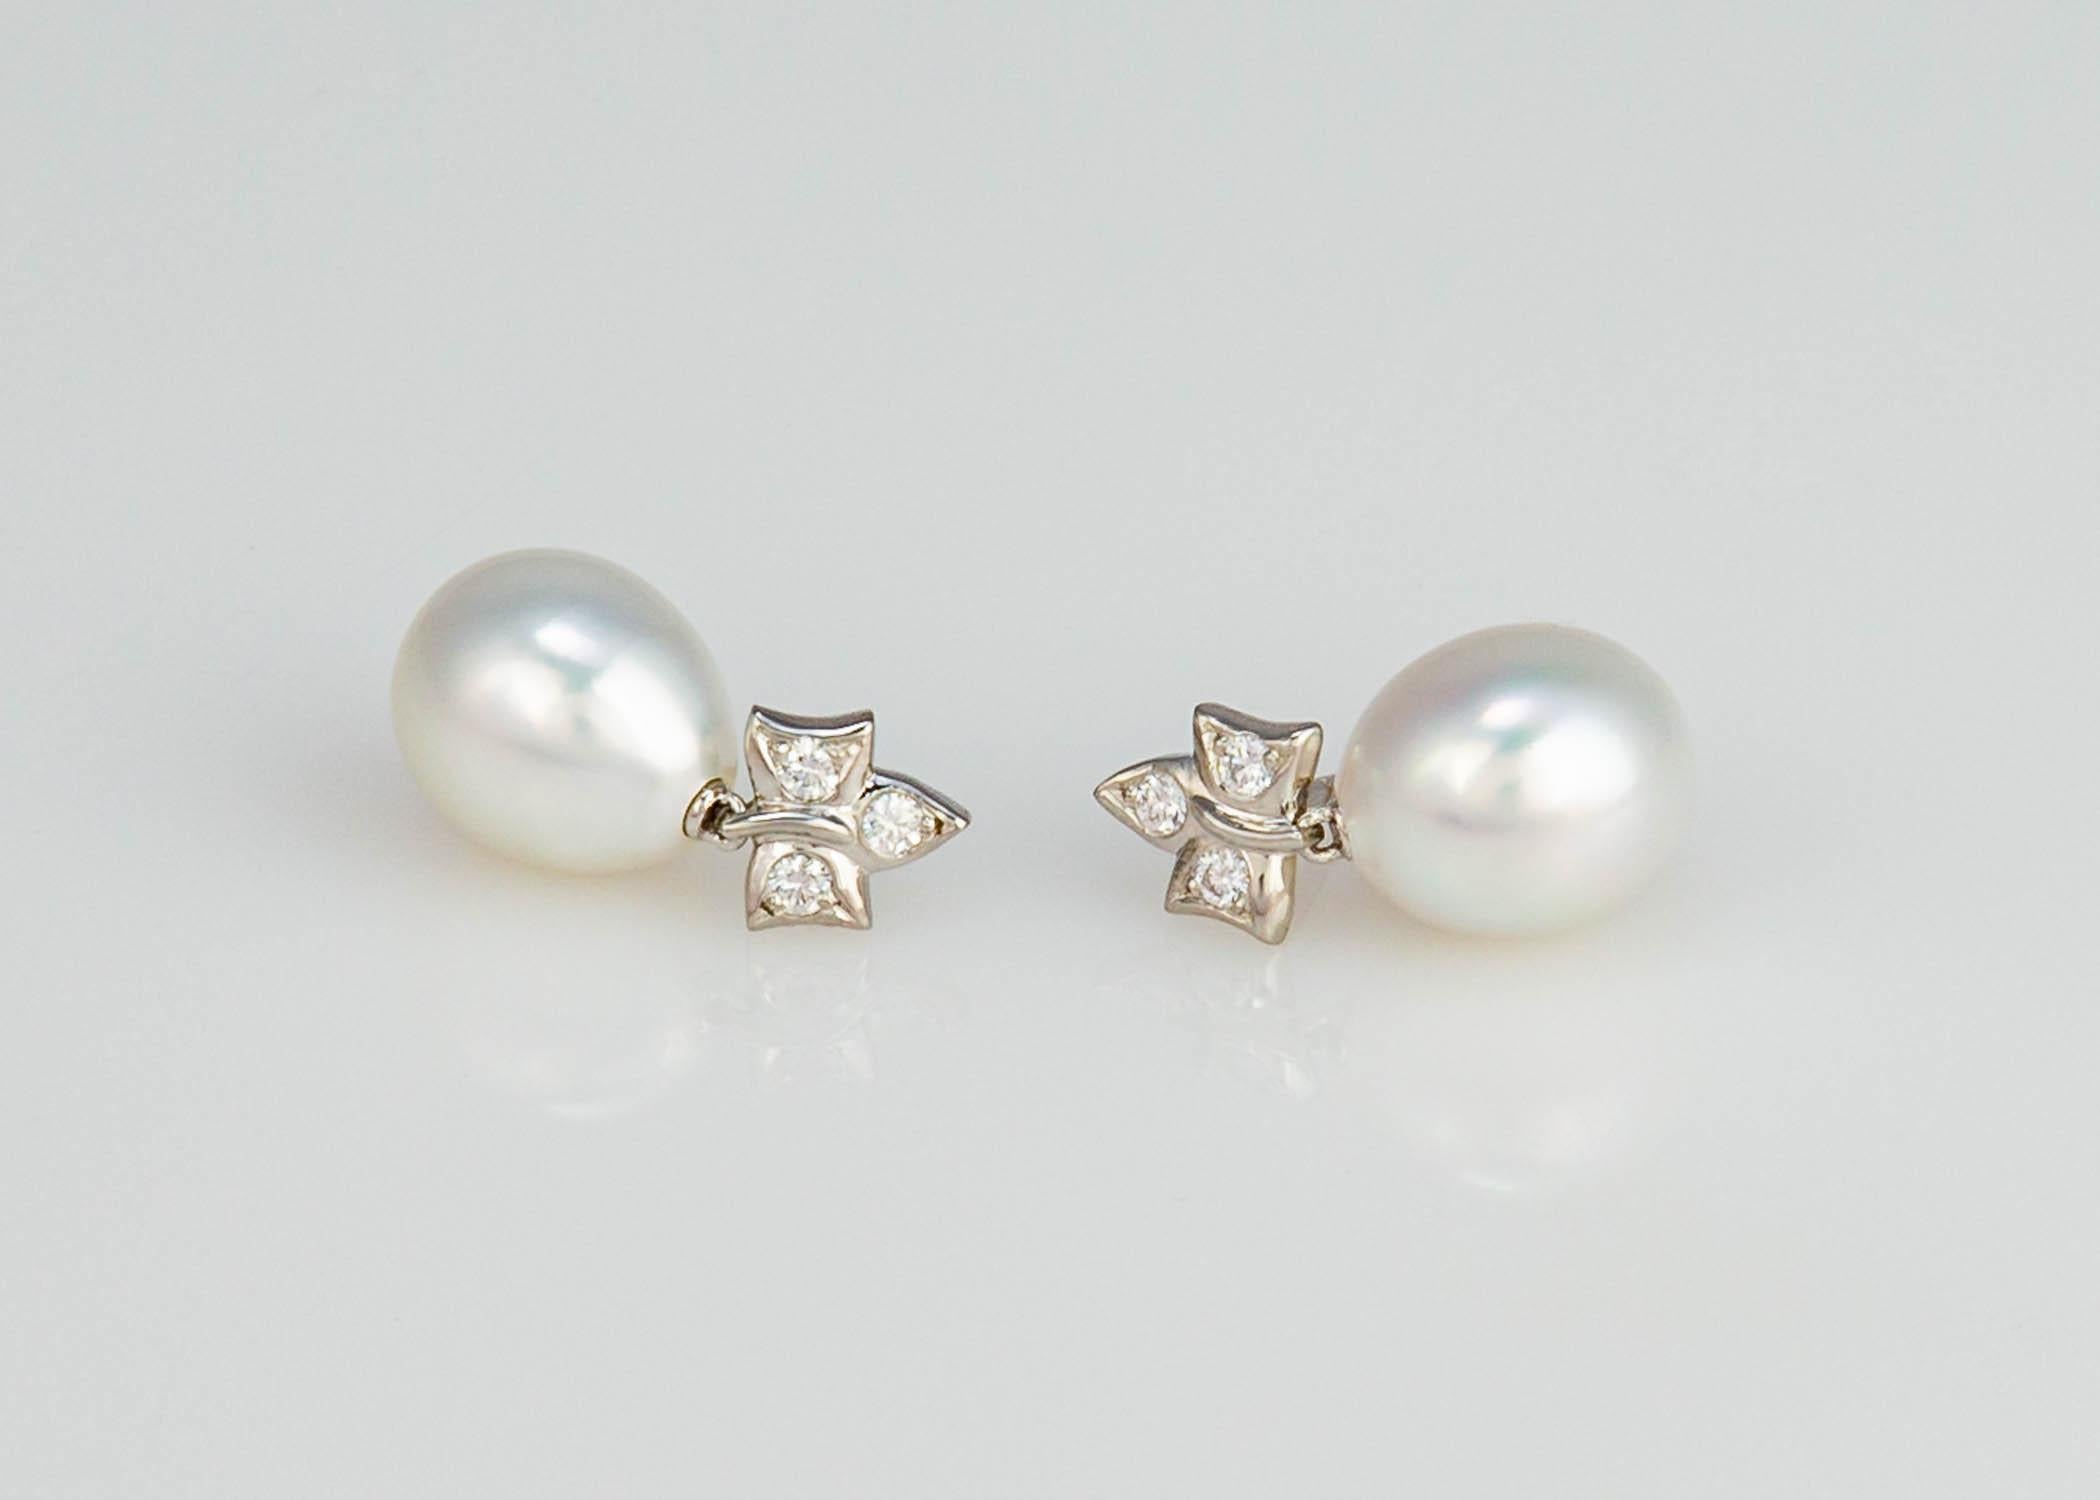 Playful, chic, sassy. Tiffany & Co. created a do everything pearl and diamond earring. Platinum, diamond and beautiful South Sea pearls are a classic combination. At just 7/8's of an inch they will go everywhere. The pearls measure 13.3mm X 11.3mm